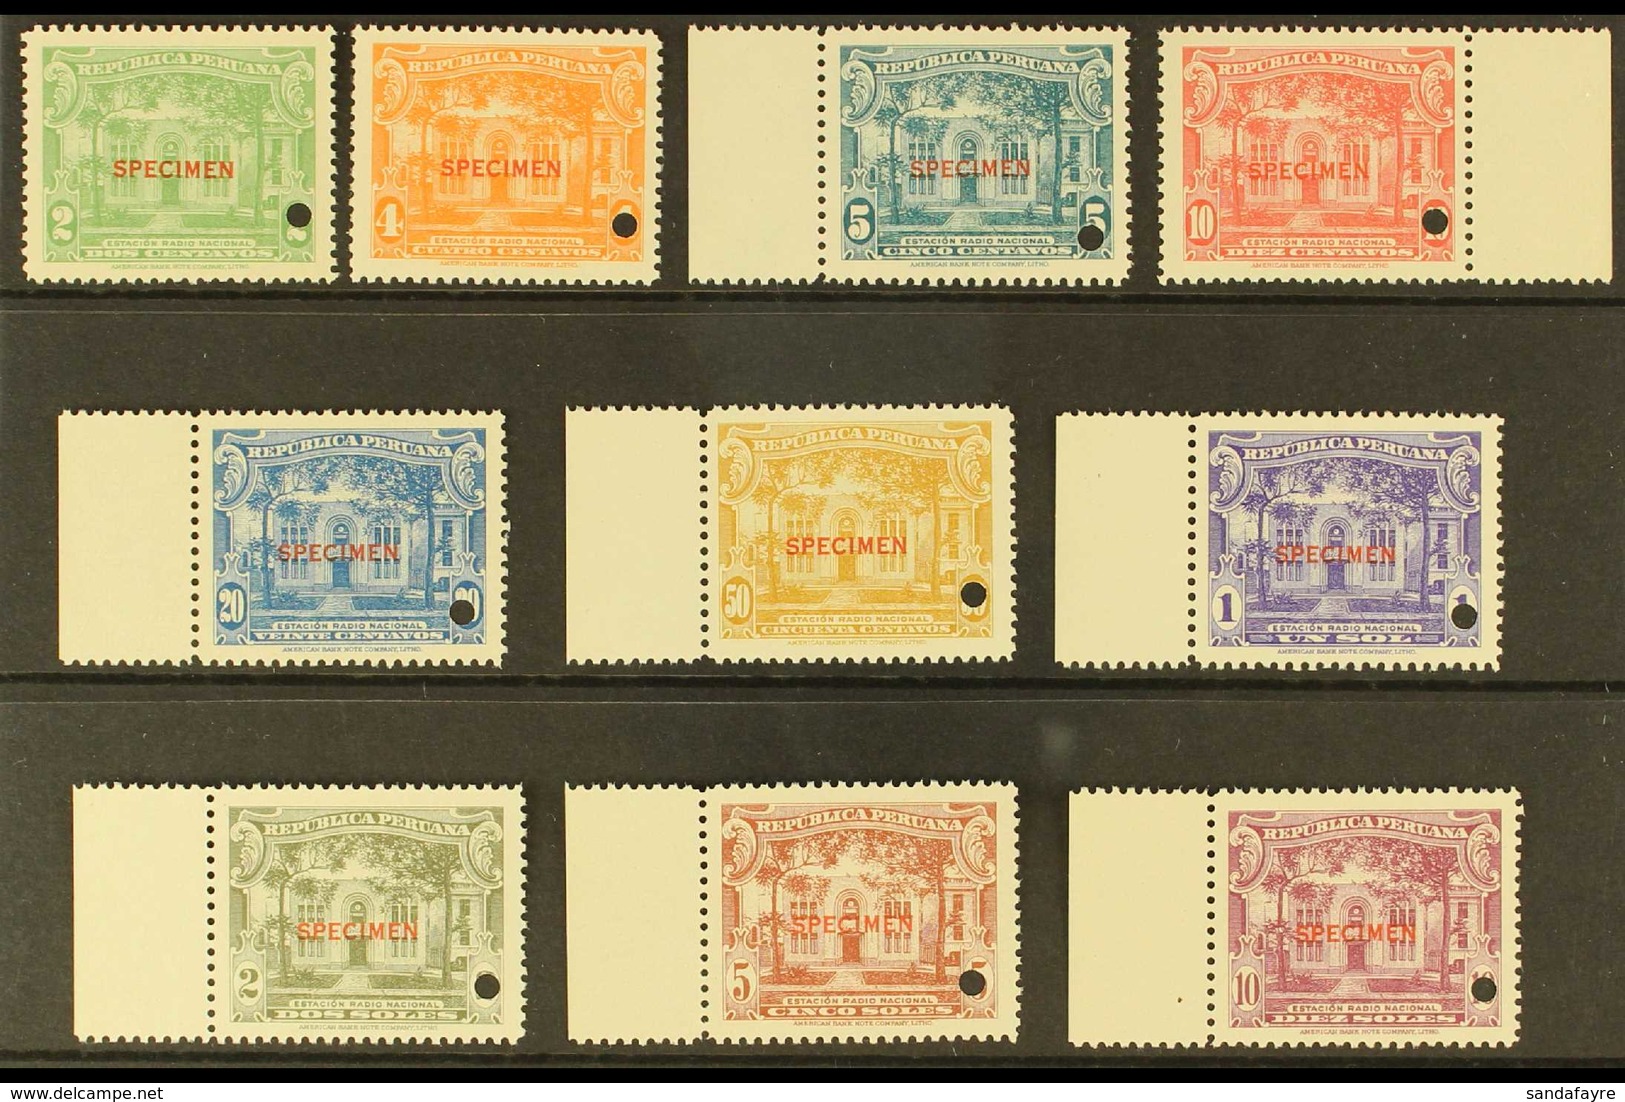 REVENUES NATIONAL RADIO STAMPS 1938 Complete Set With "SPECIMEN" Overprints And Small Security Punch Holes, Never Hinged - Pérou